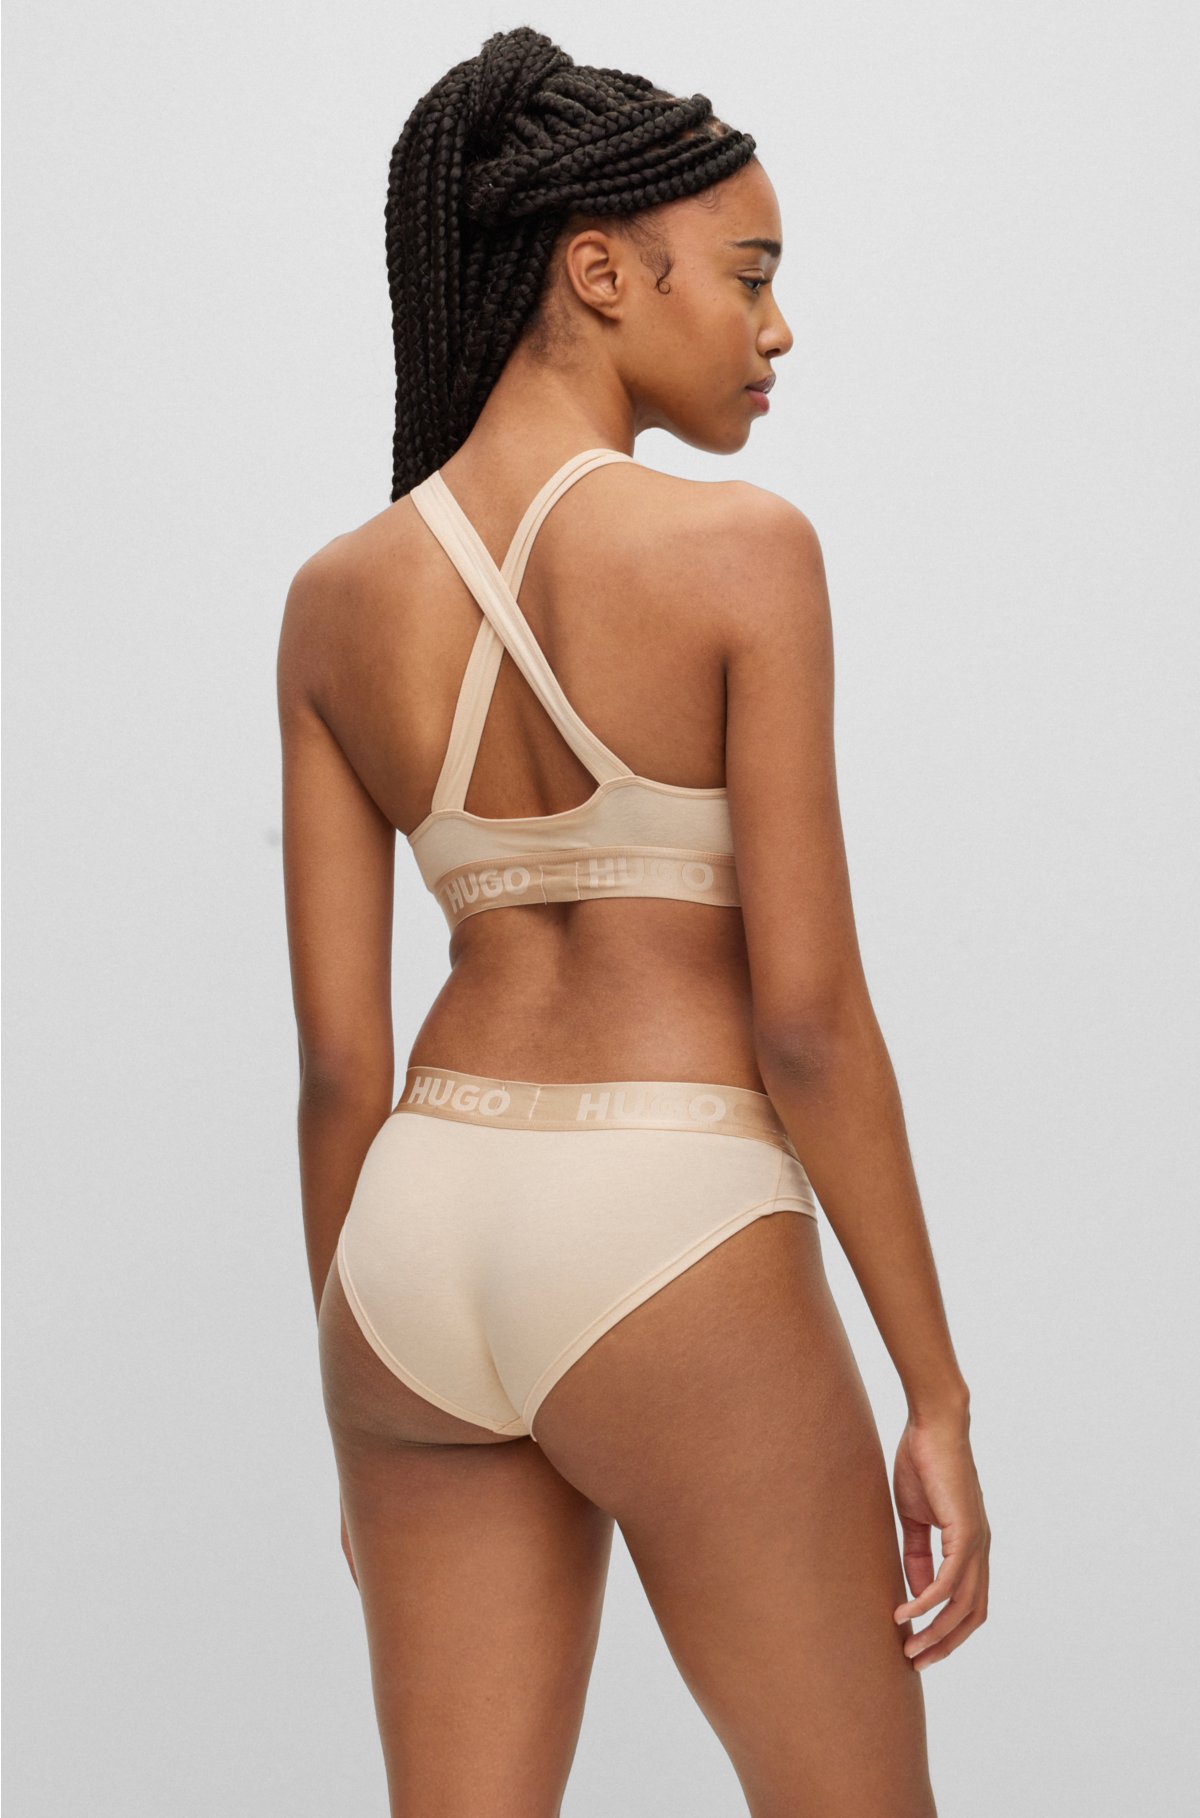 HUGO - Bralette in stretch repeat logos with cotton